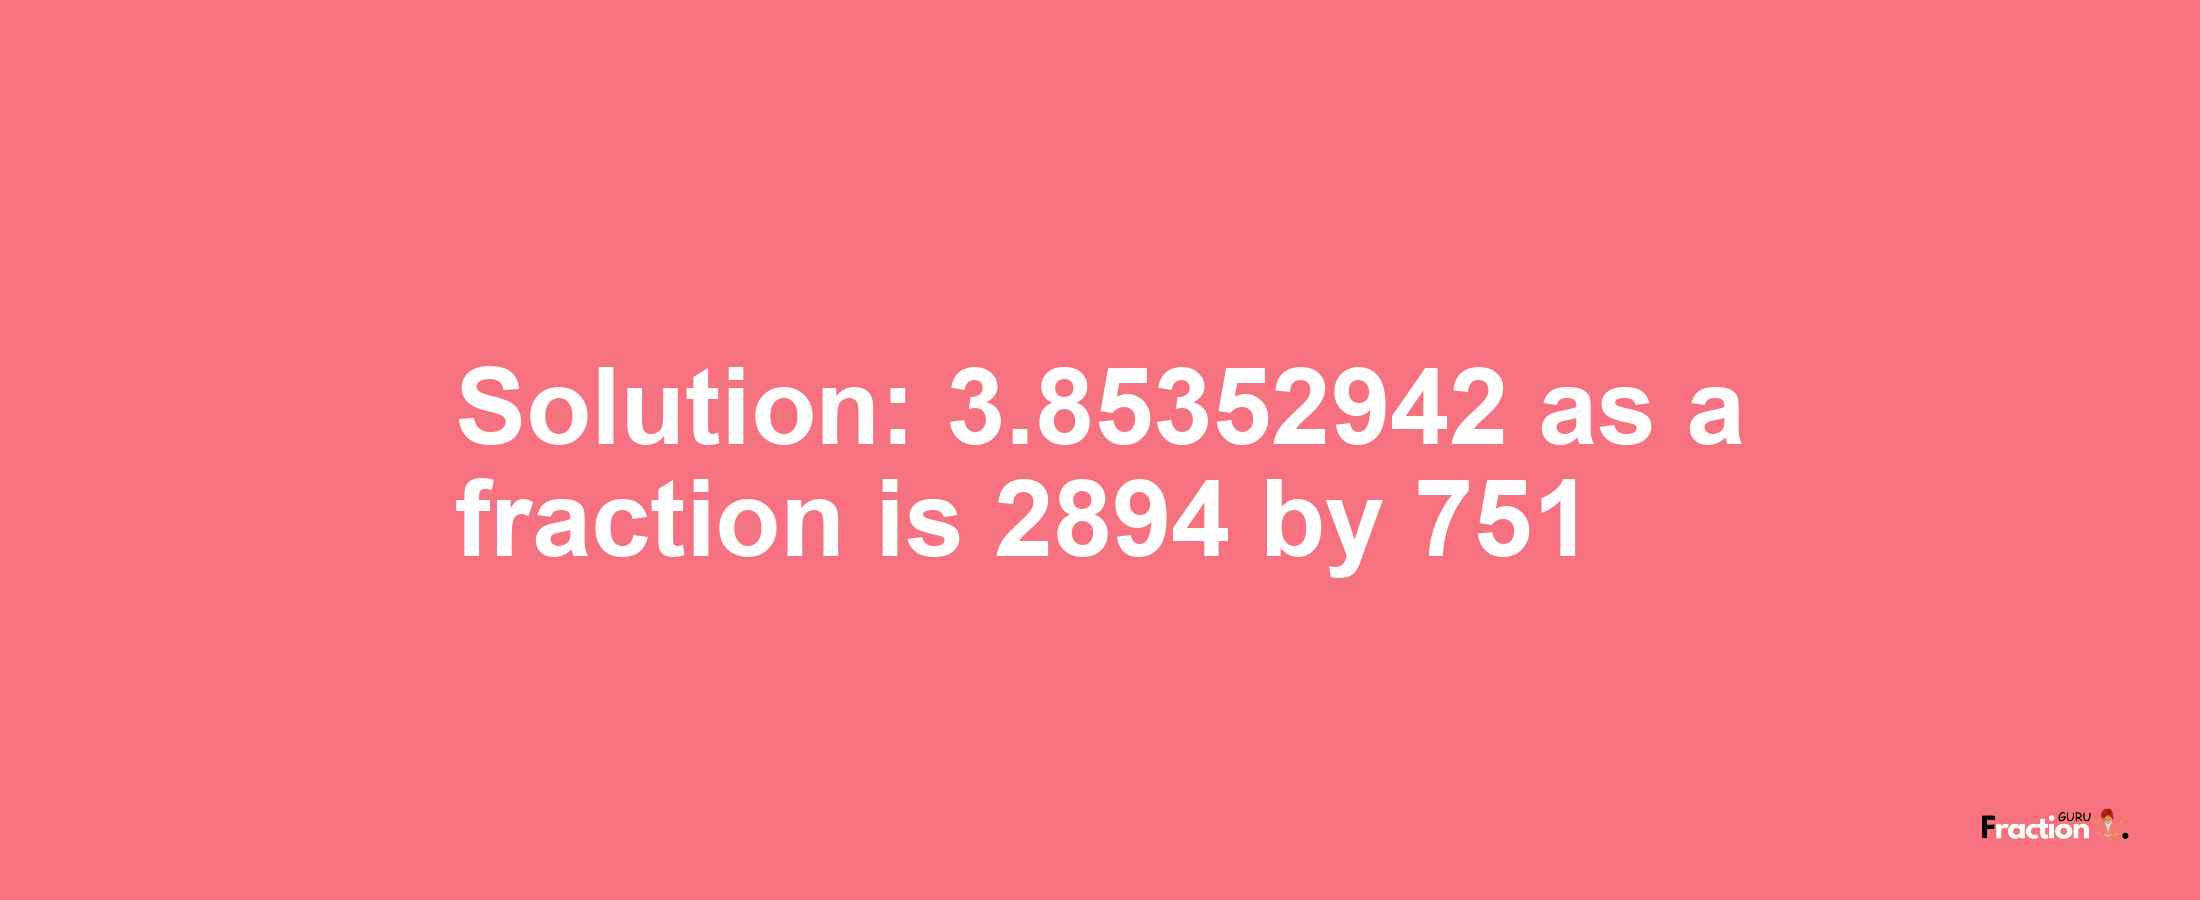 Solution:3.85352942 as a fraction is 2894/751